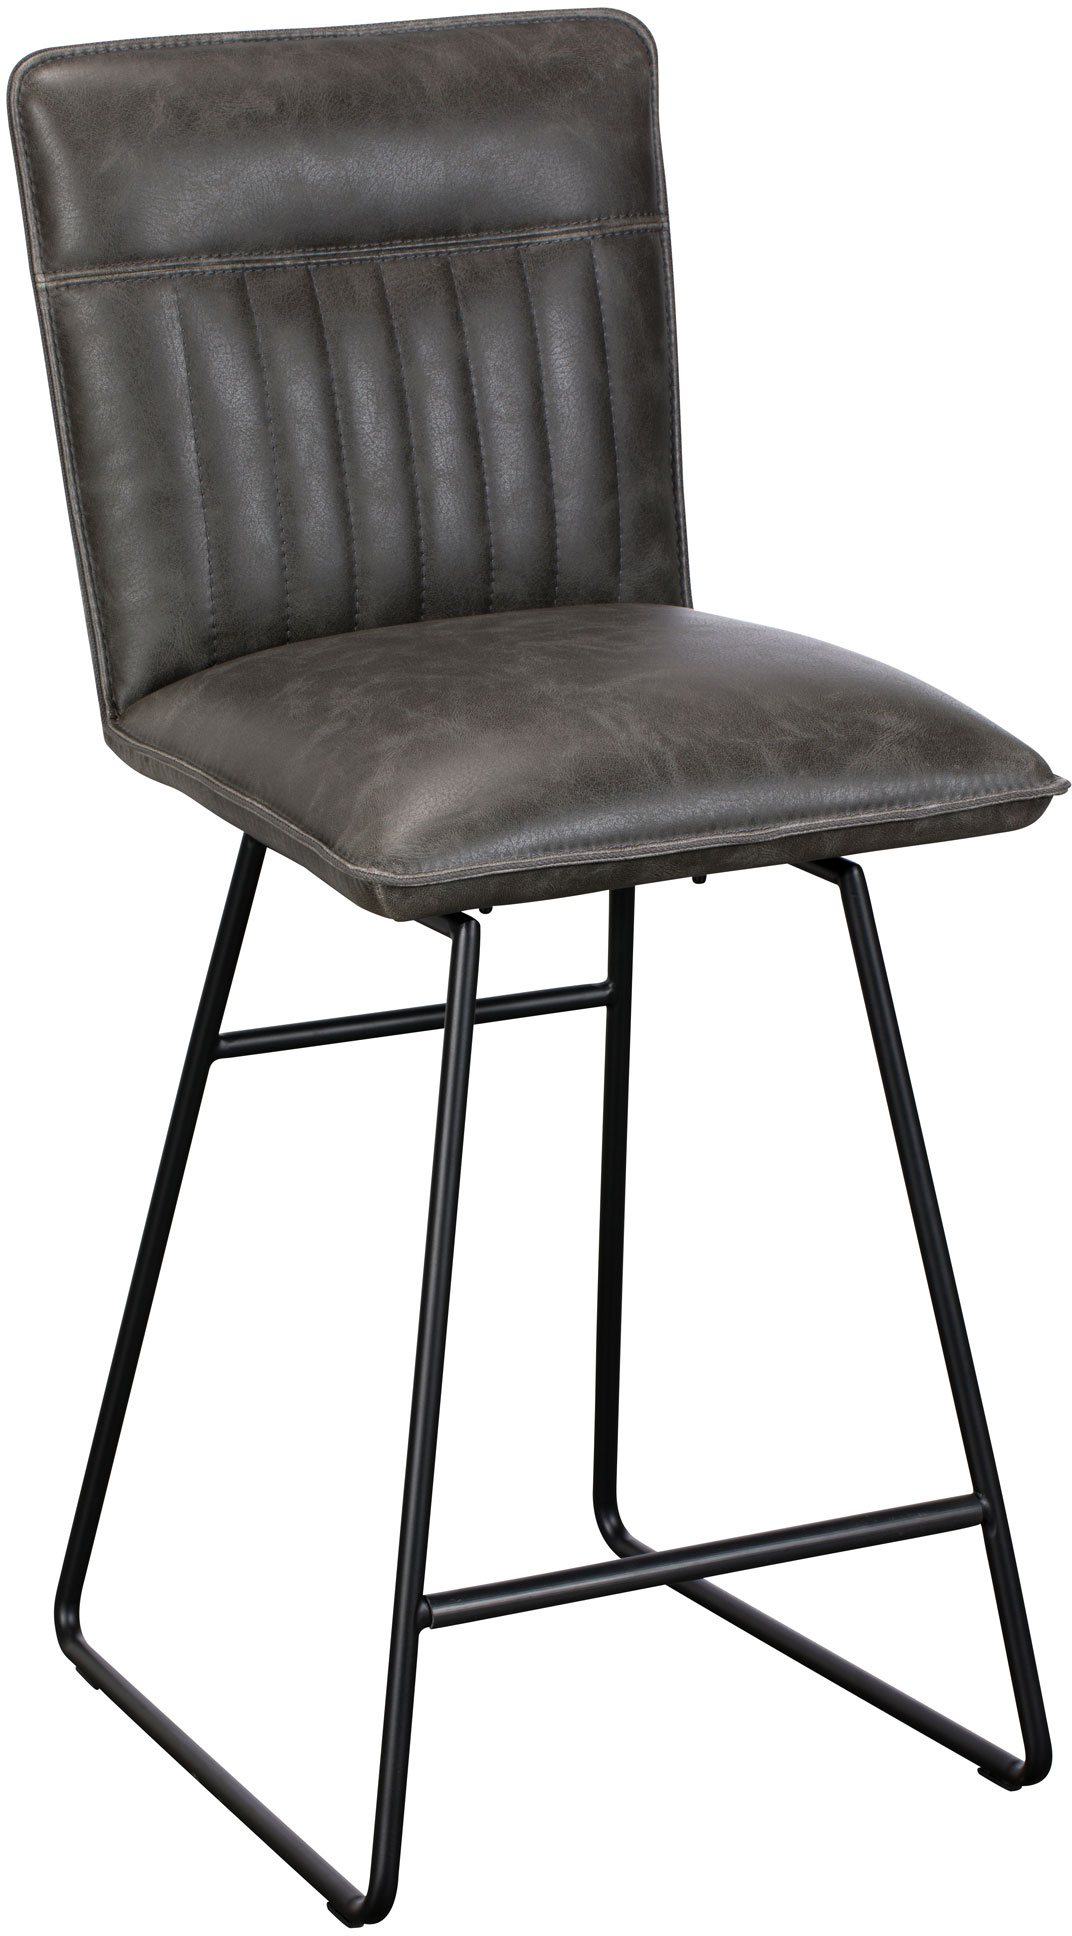 Cooper Swivel Bar Stool In Grey Faux, Faux Leather Bar Stools With Backs Uk